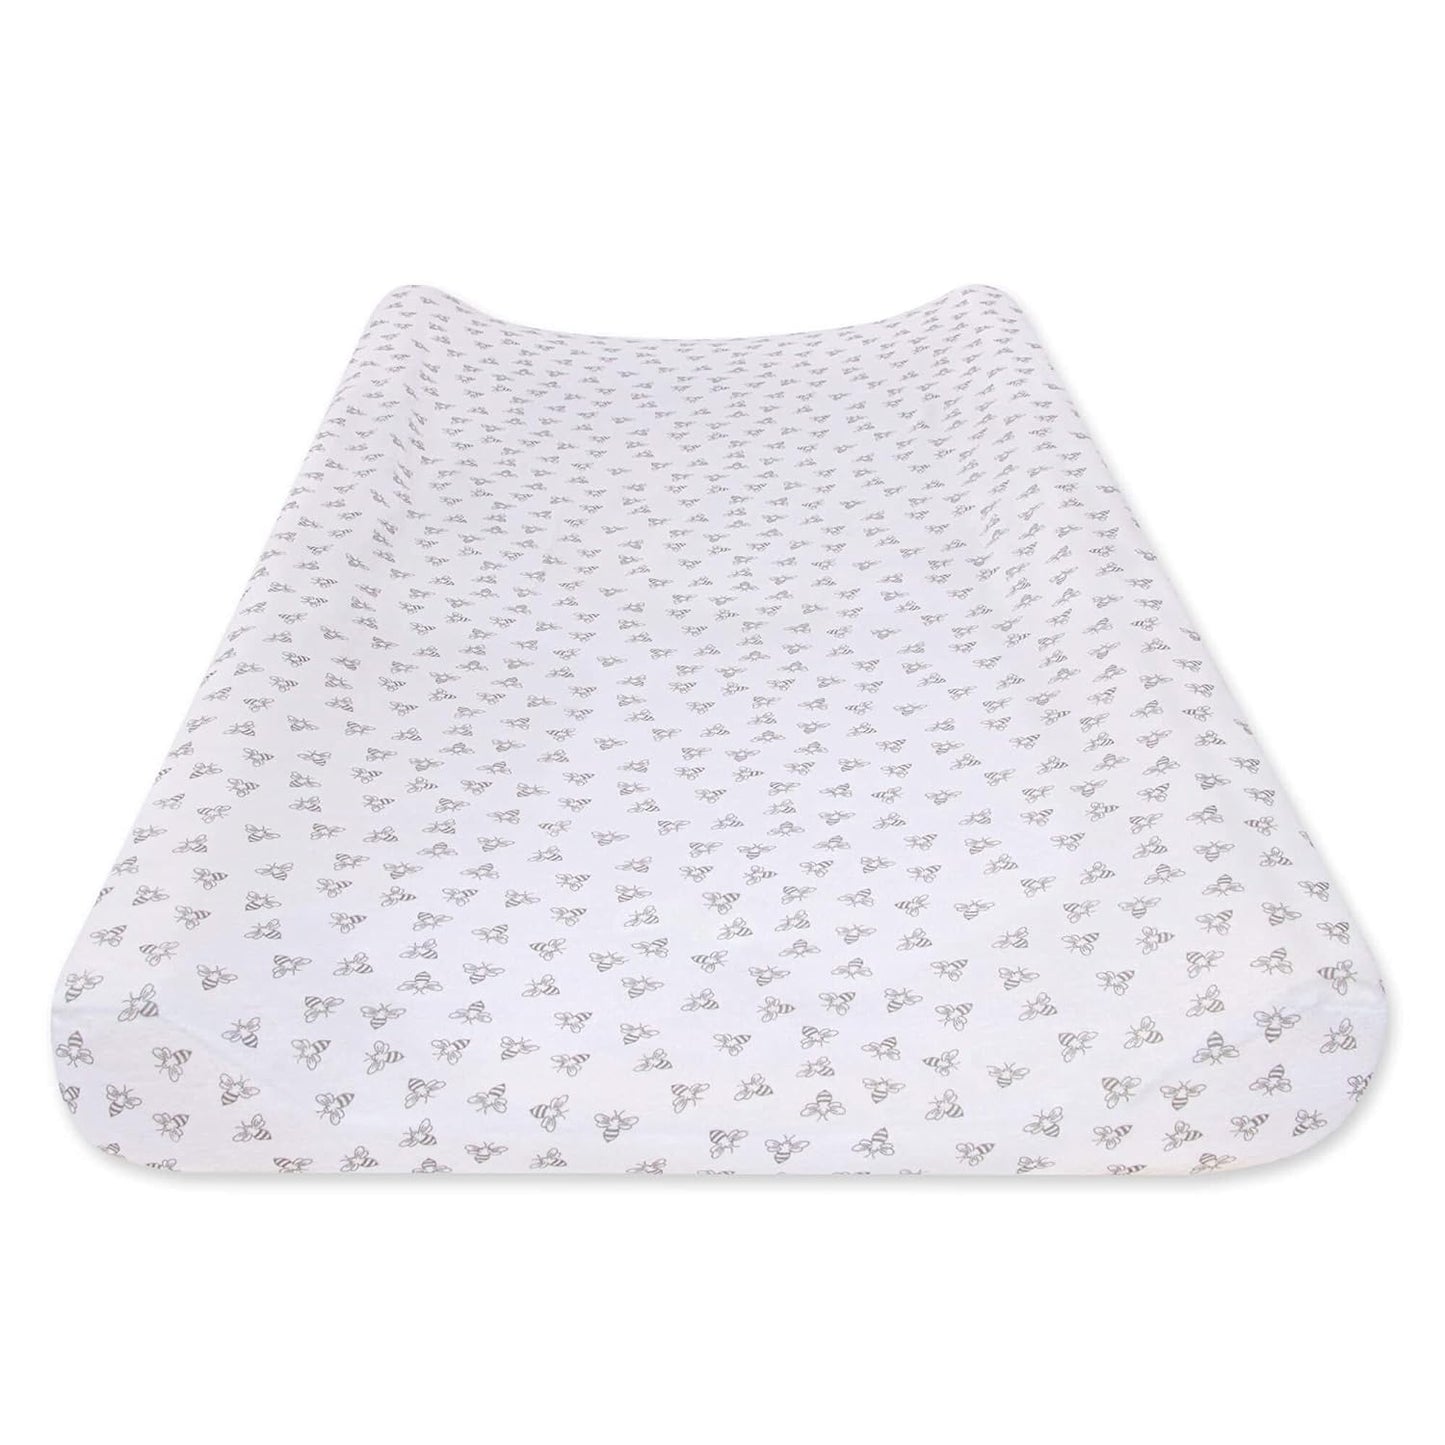 Burt's Bees Baby - Changing Pad Cover, 100% Organic Jersey Cotton Changing Pad Liner for Standard 16 x 32 Inch Changing Mats